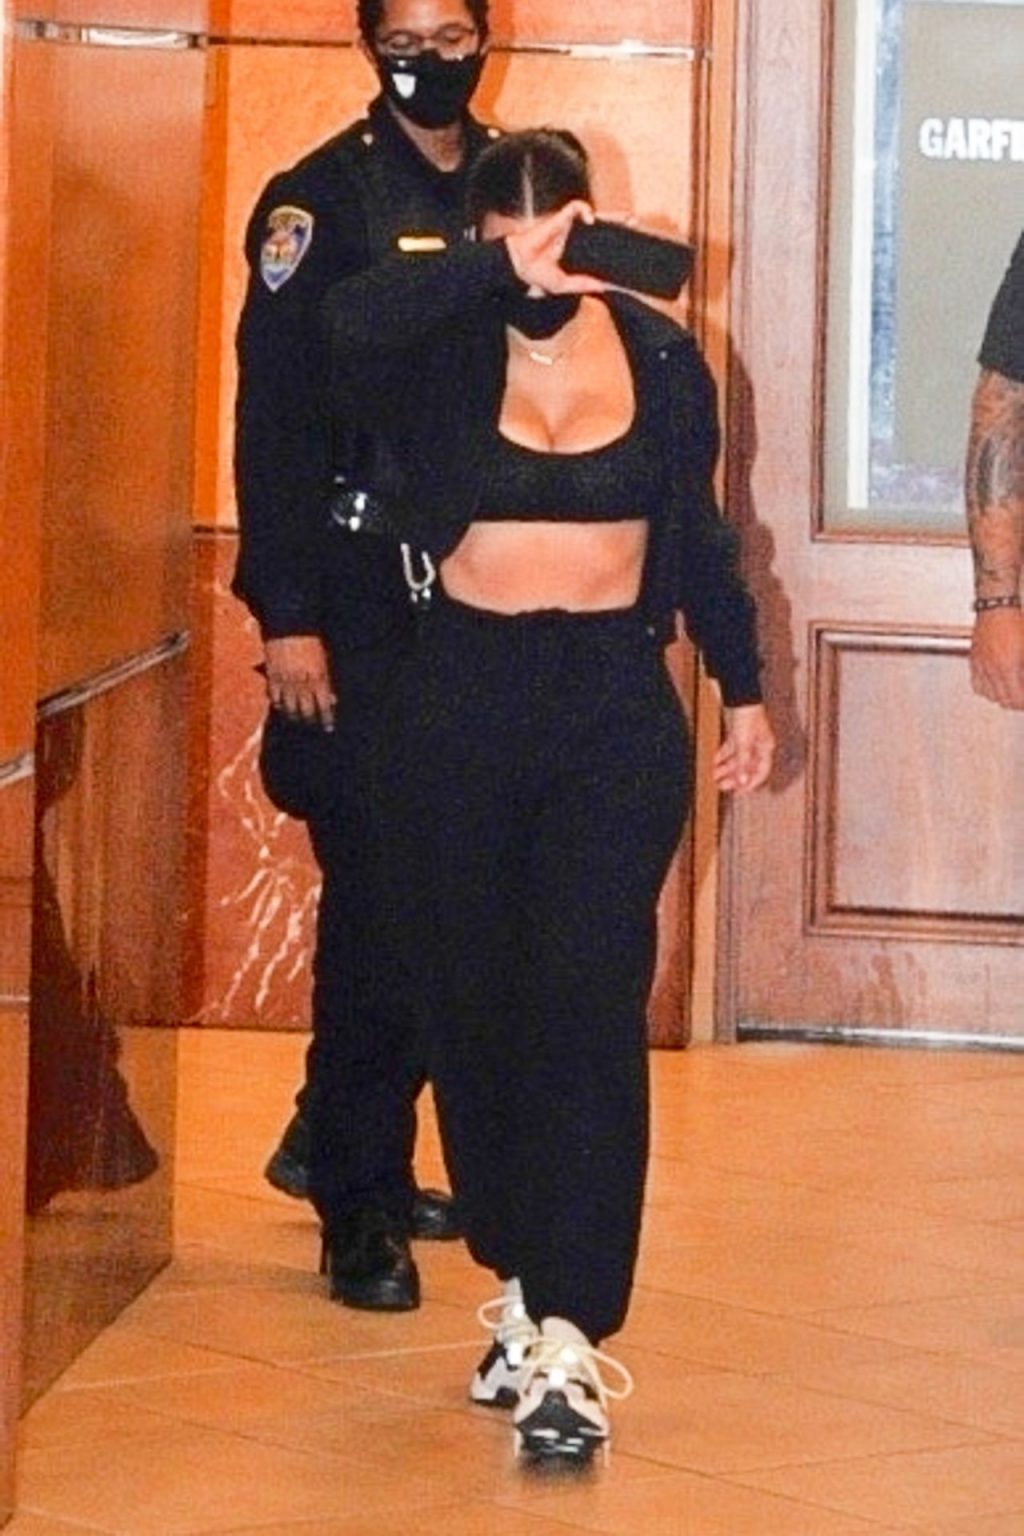 Kim Kardashian Shows Off Her Curves as She Leaves a Dermatologist Appointment (44 Photos)